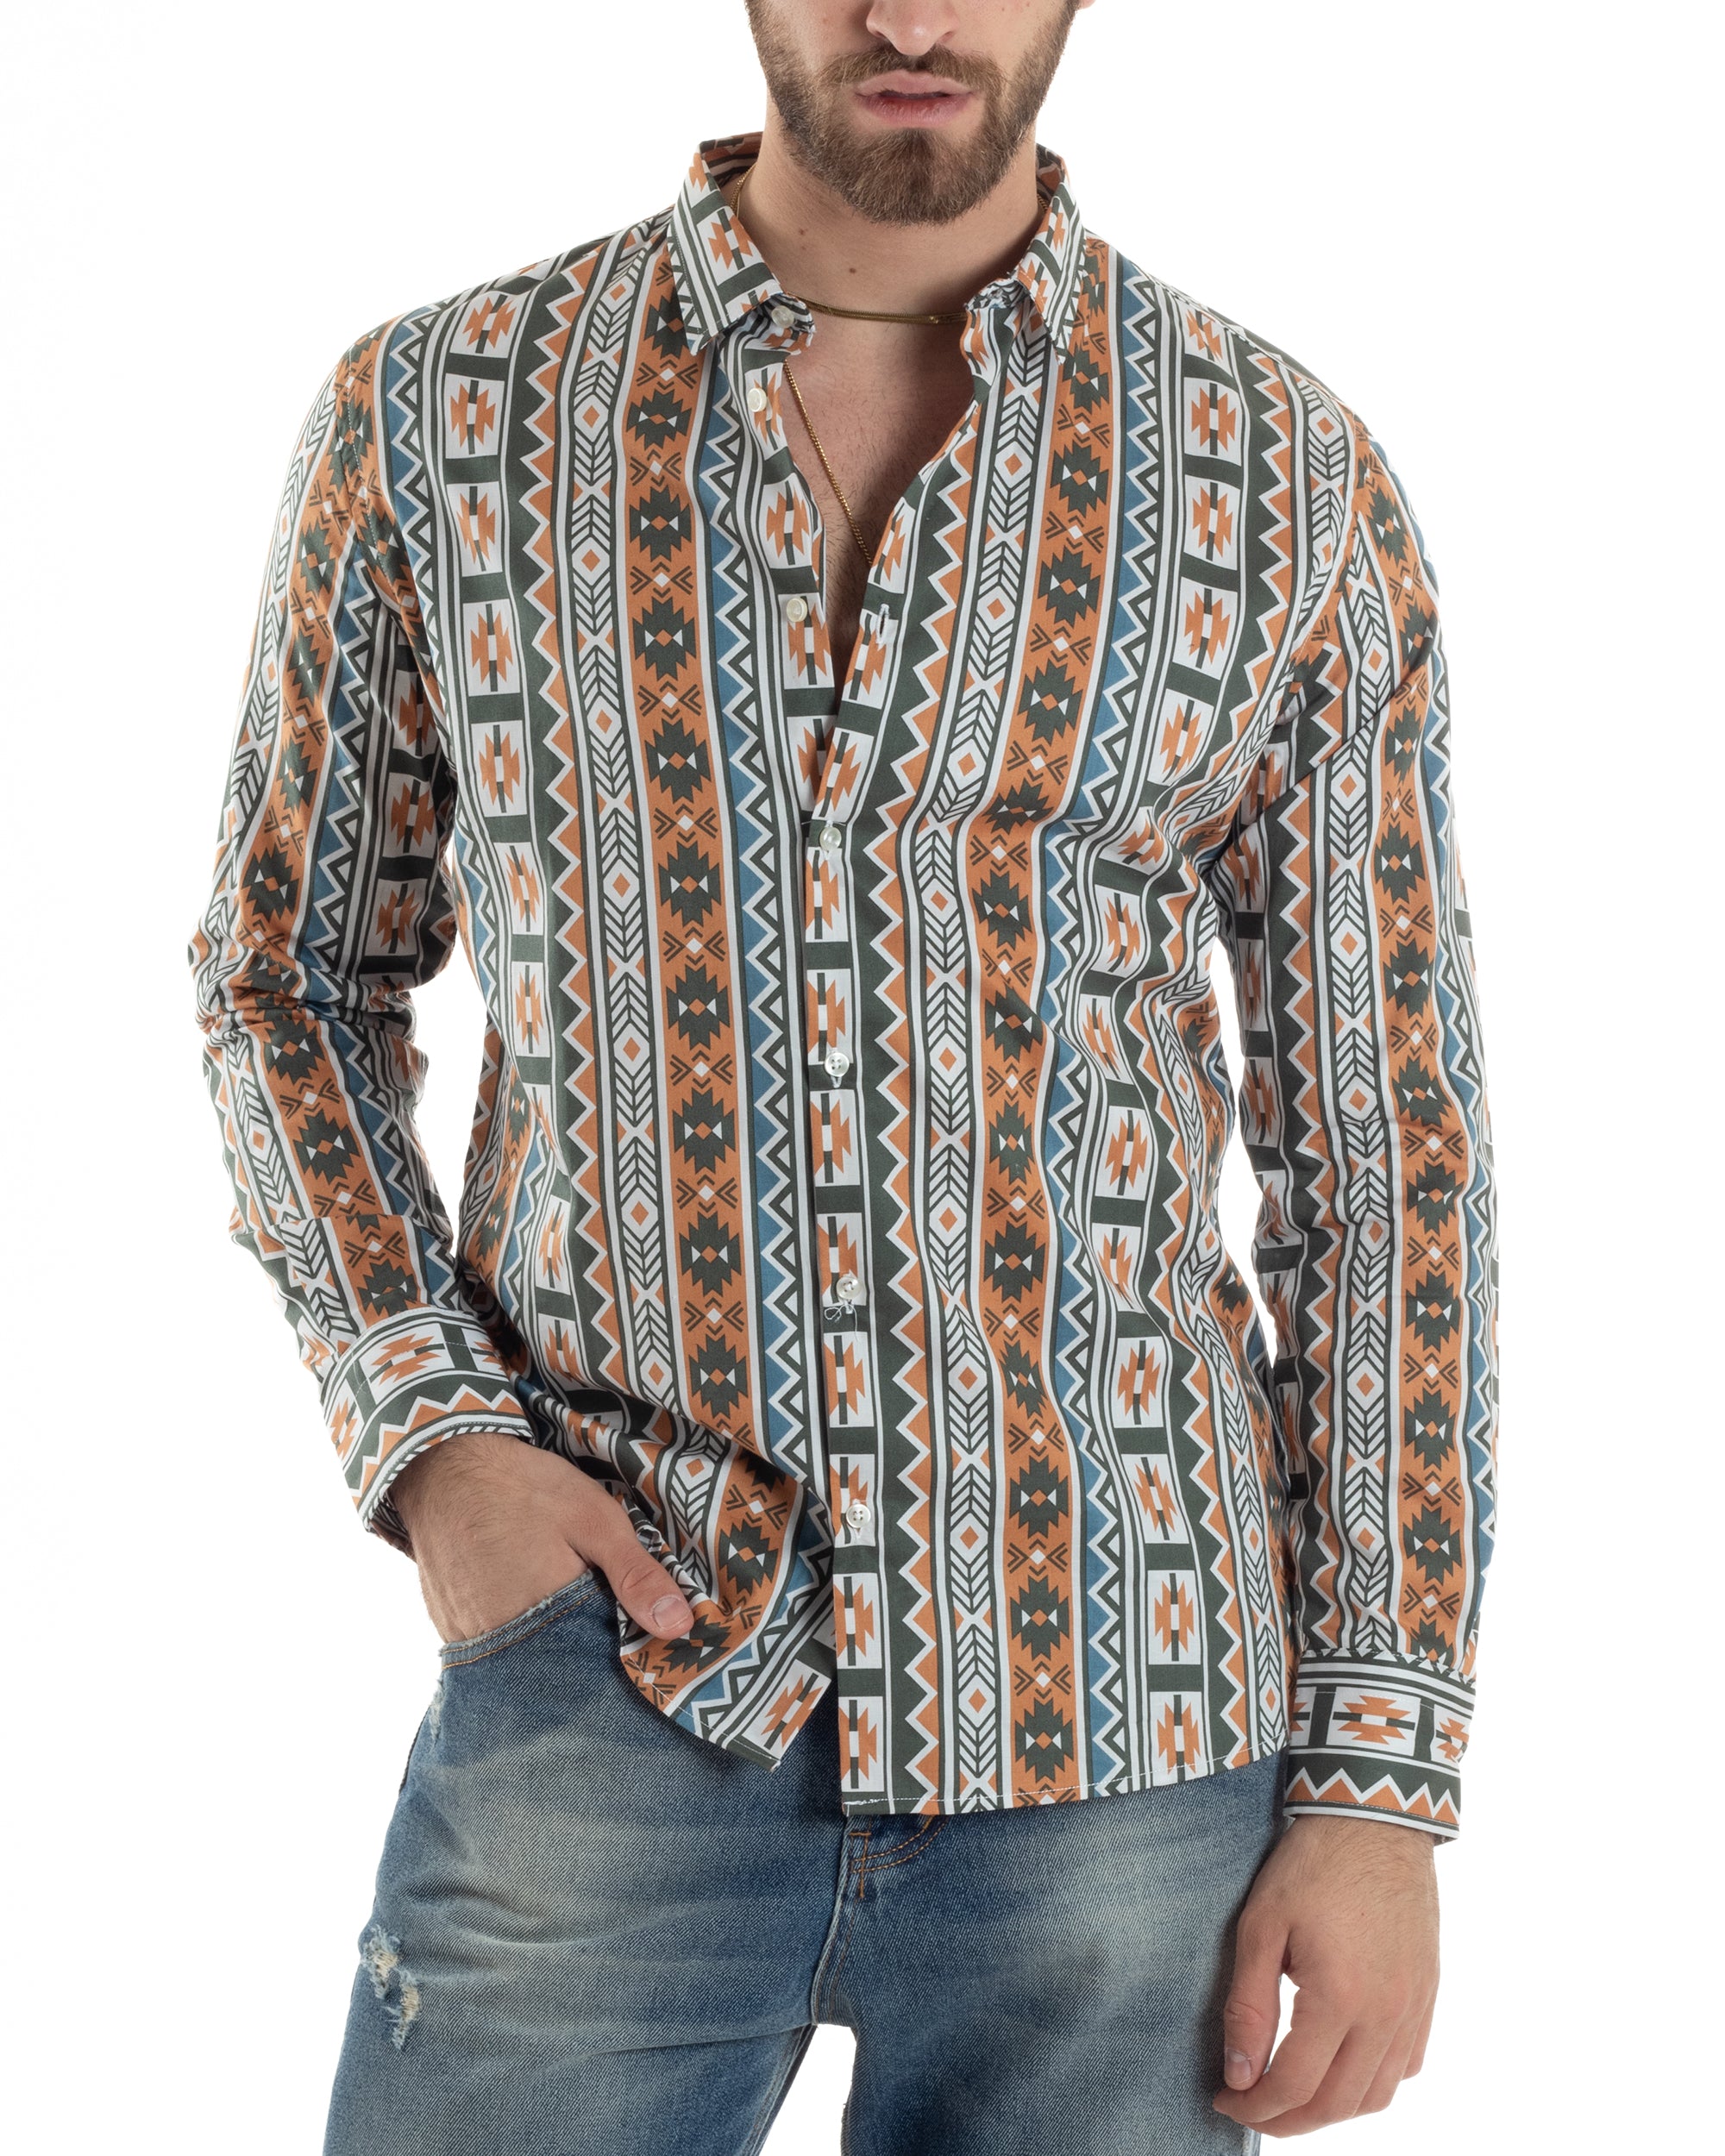 Men's Shirt With Collar Long Sleeve Regular Fit Multicolor GIOSAL-C2431A